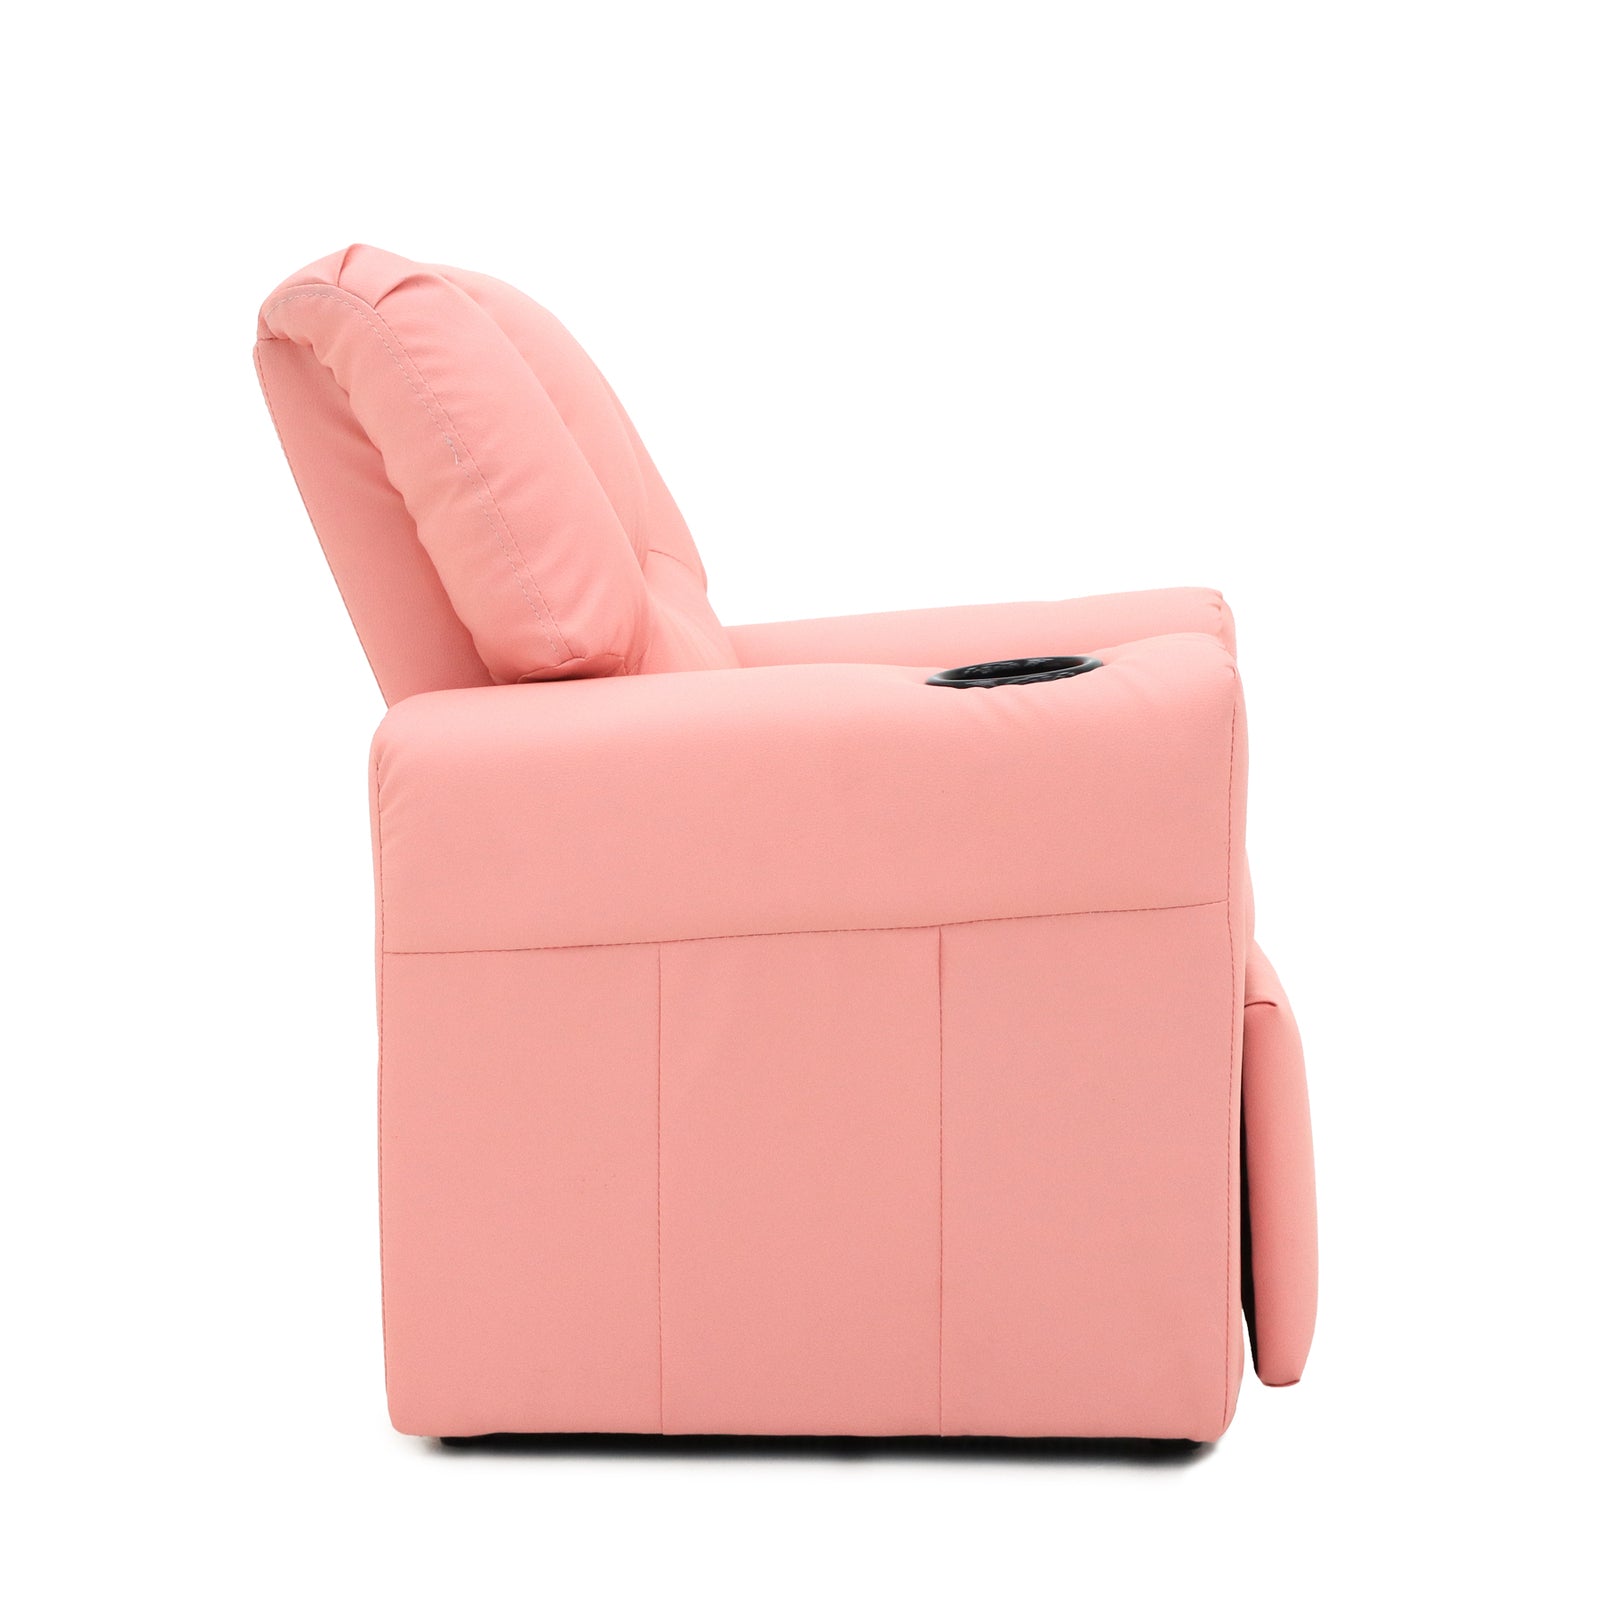 Hacienda Kids Pink Recliner Chair with Built-In Cup Holder & Footrest